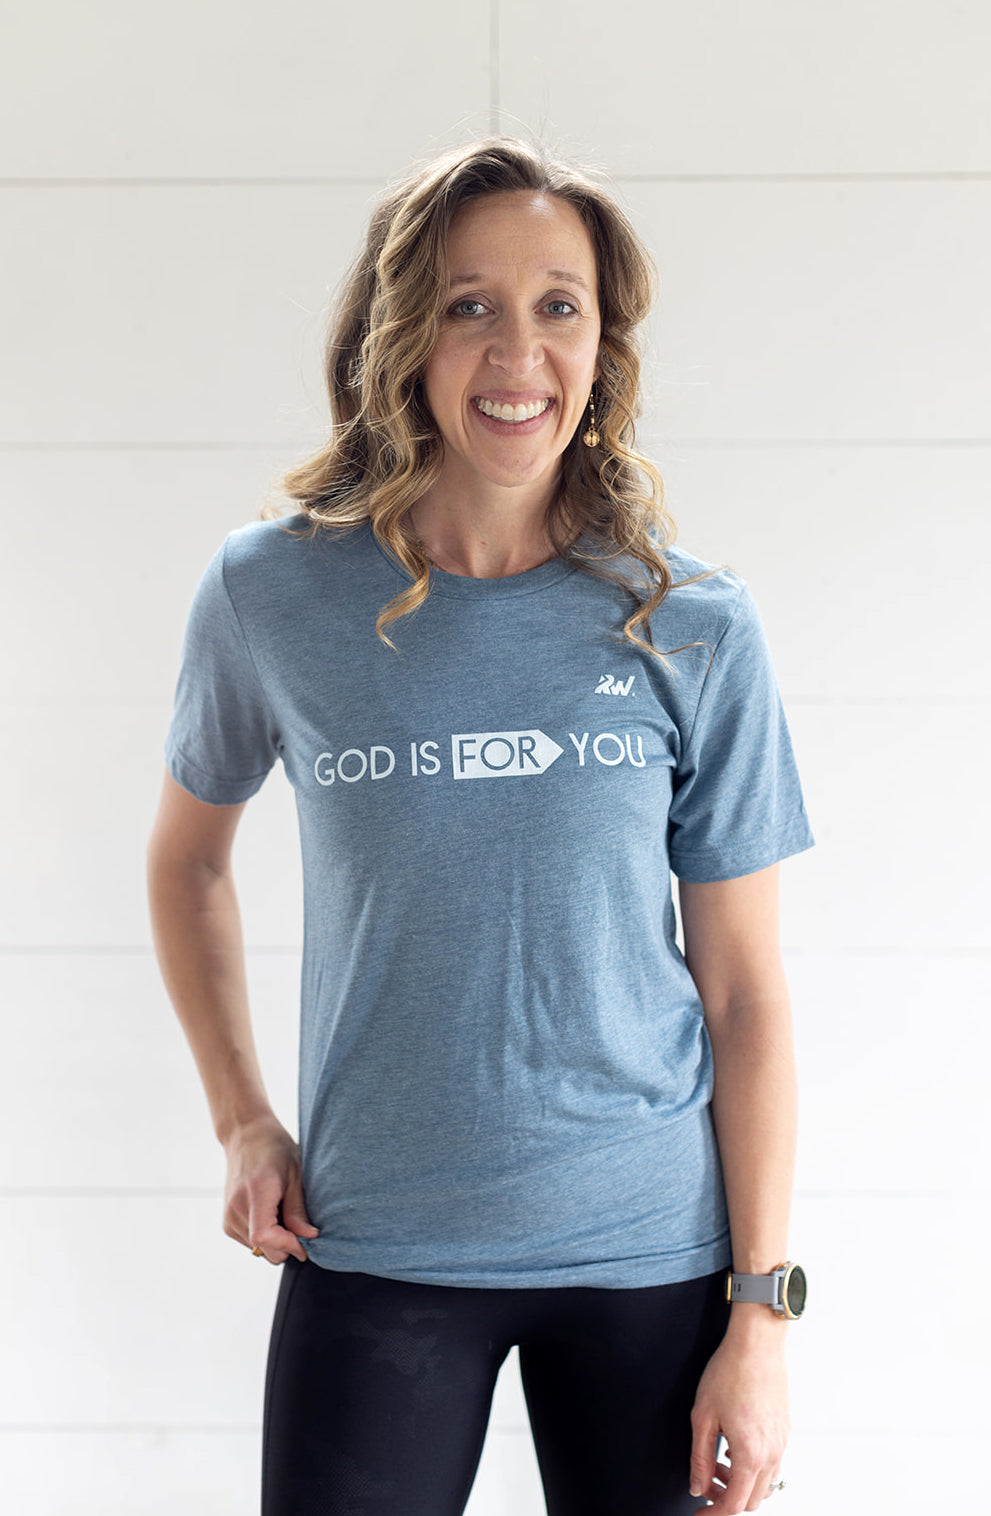 God is For You Triblend Tee - XS only